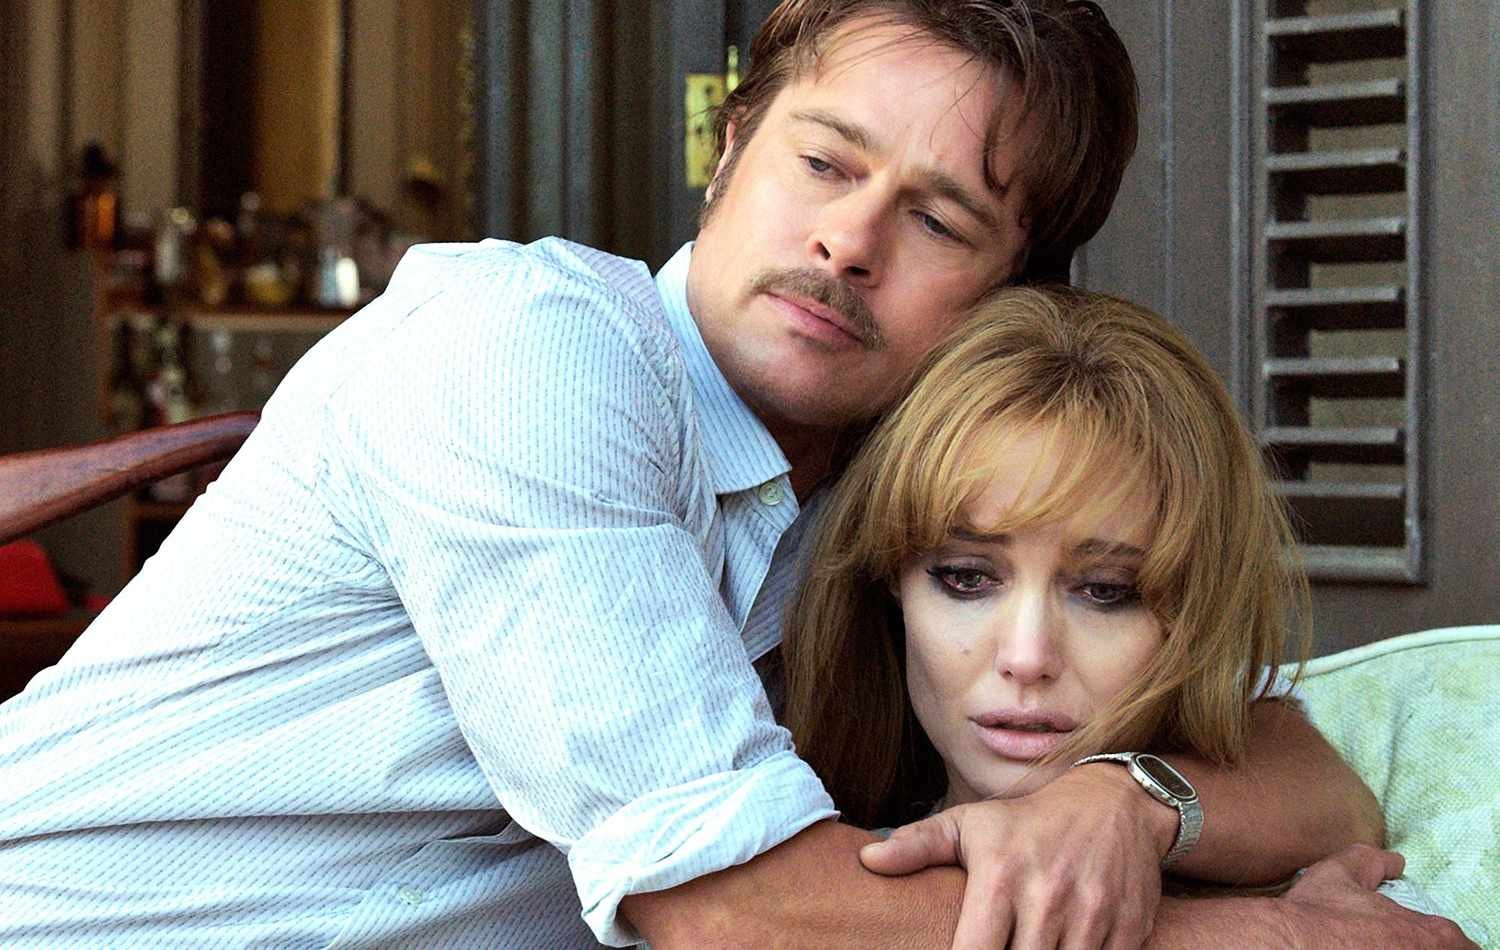 Angelina Jolie and Brad Pitt in By the Sea